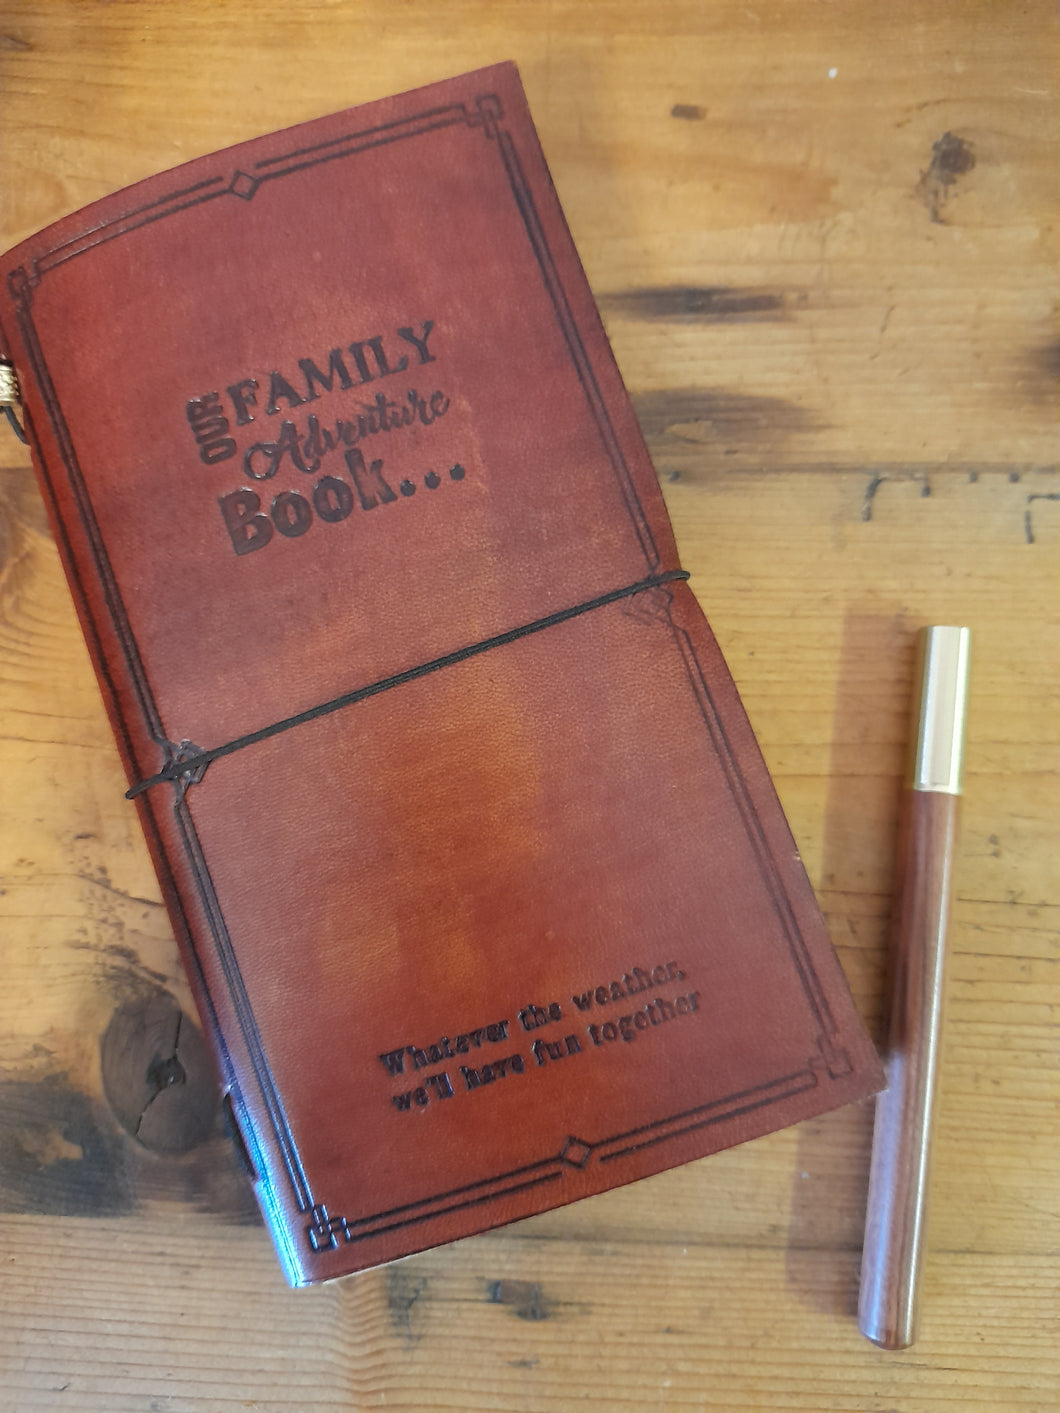 Handmade leather journal - Our family adventure book